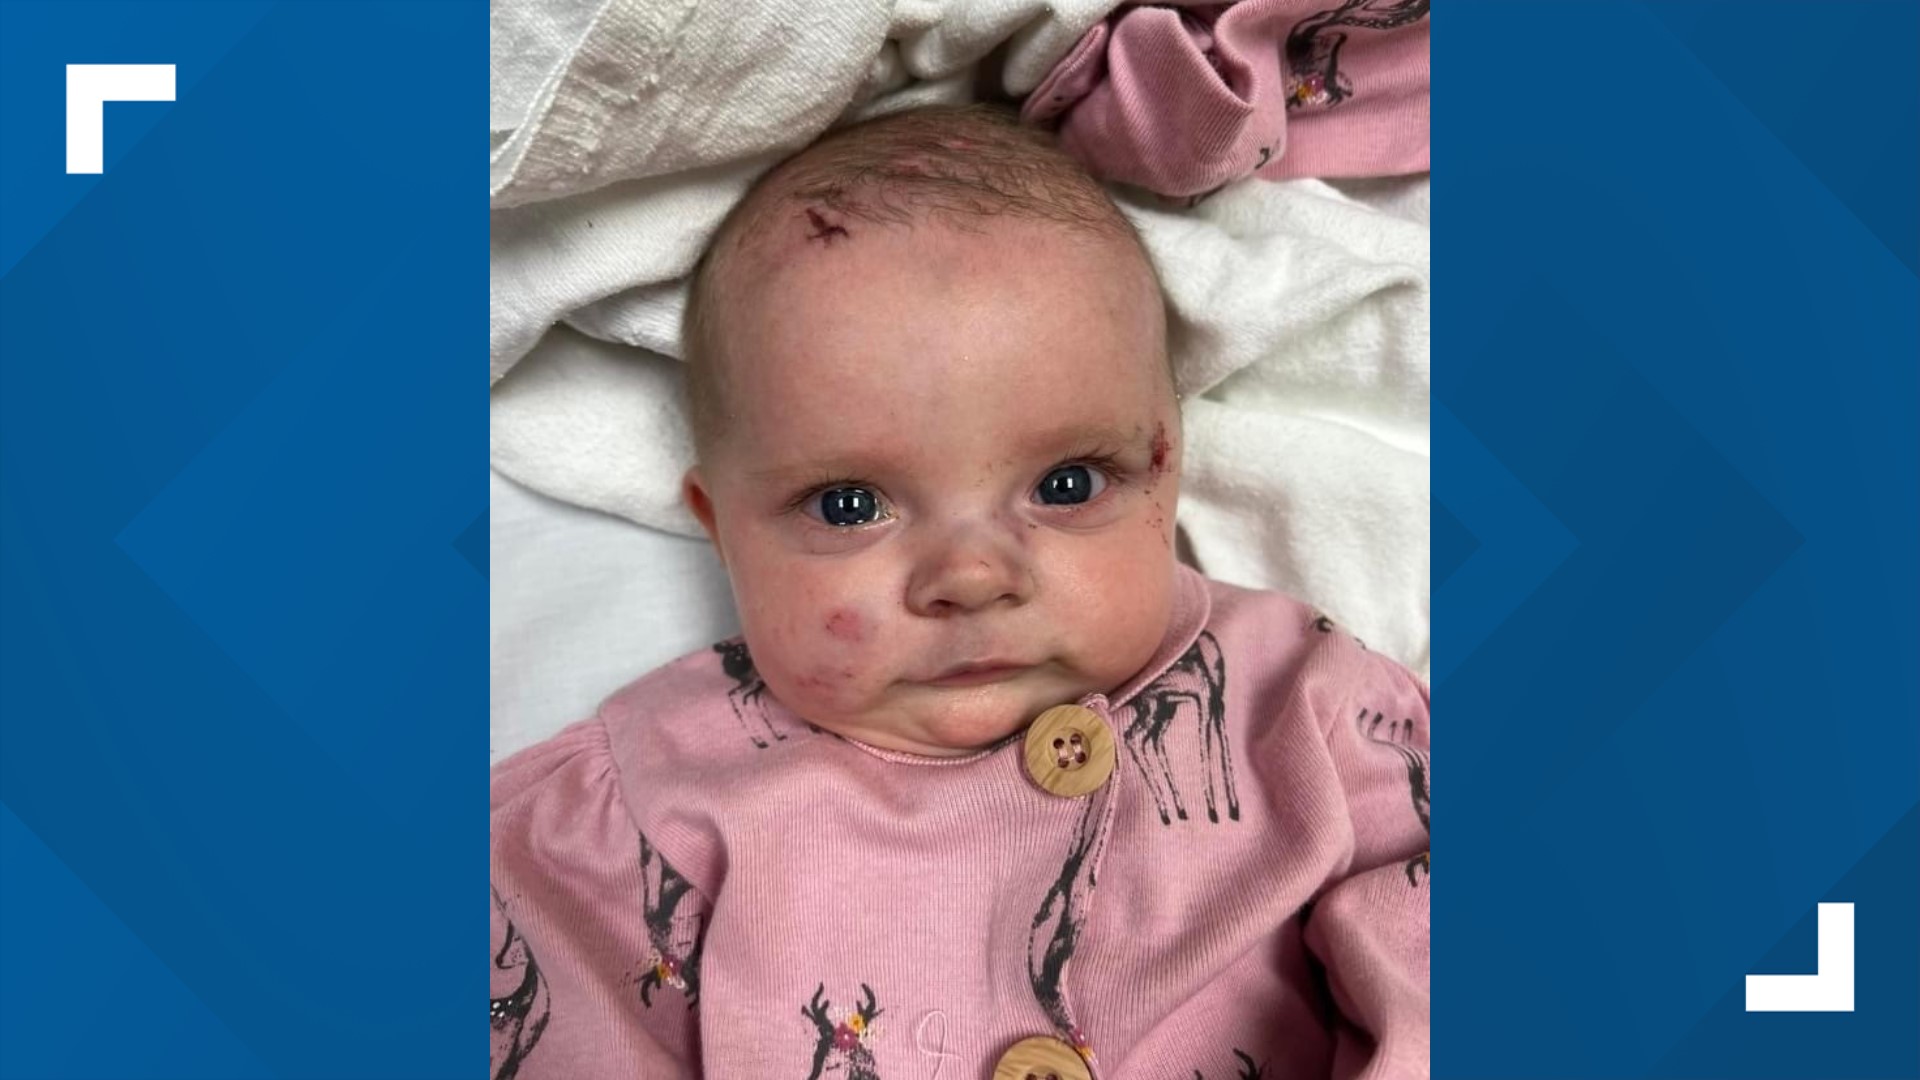 Baby Oaklynn was pulled off life support after swelling to her brain worsened, her father said.